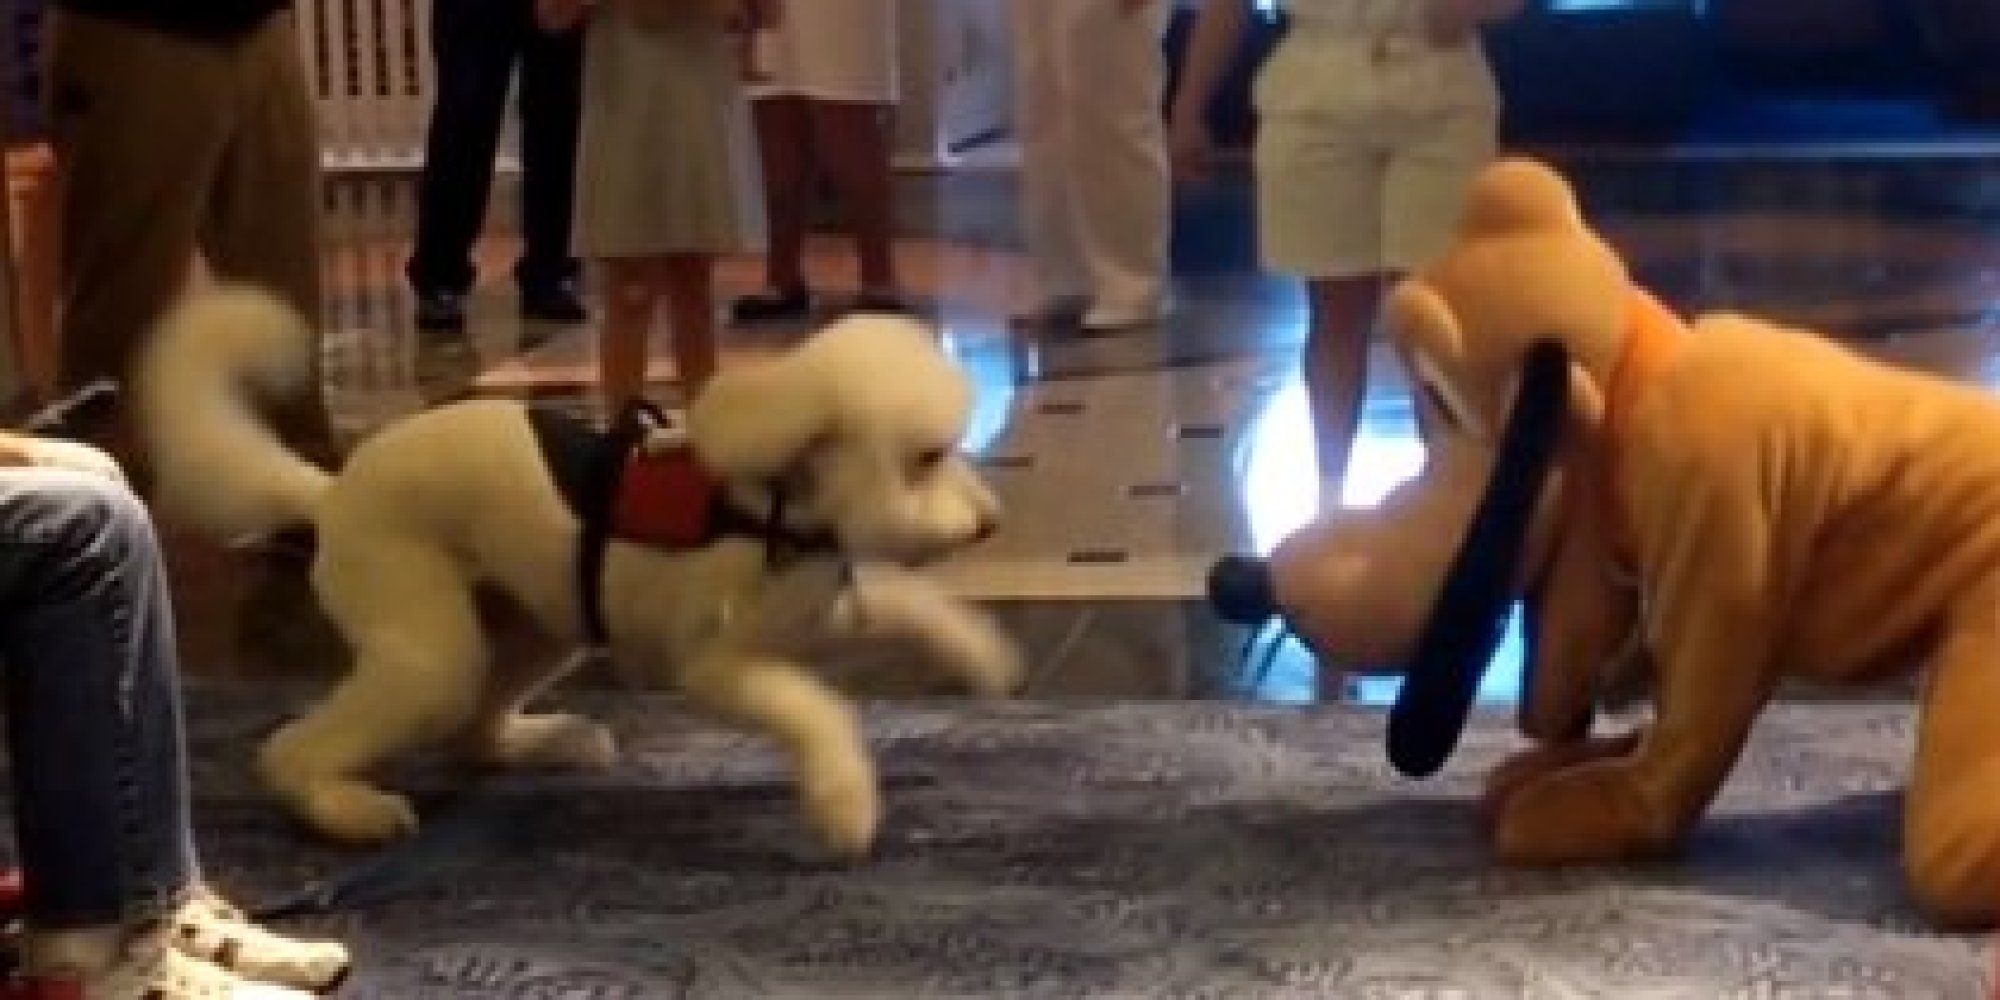 Service Dog Meets Actor Dressed As Pluto On Disney Cruise, And Is Totally Mesmerized